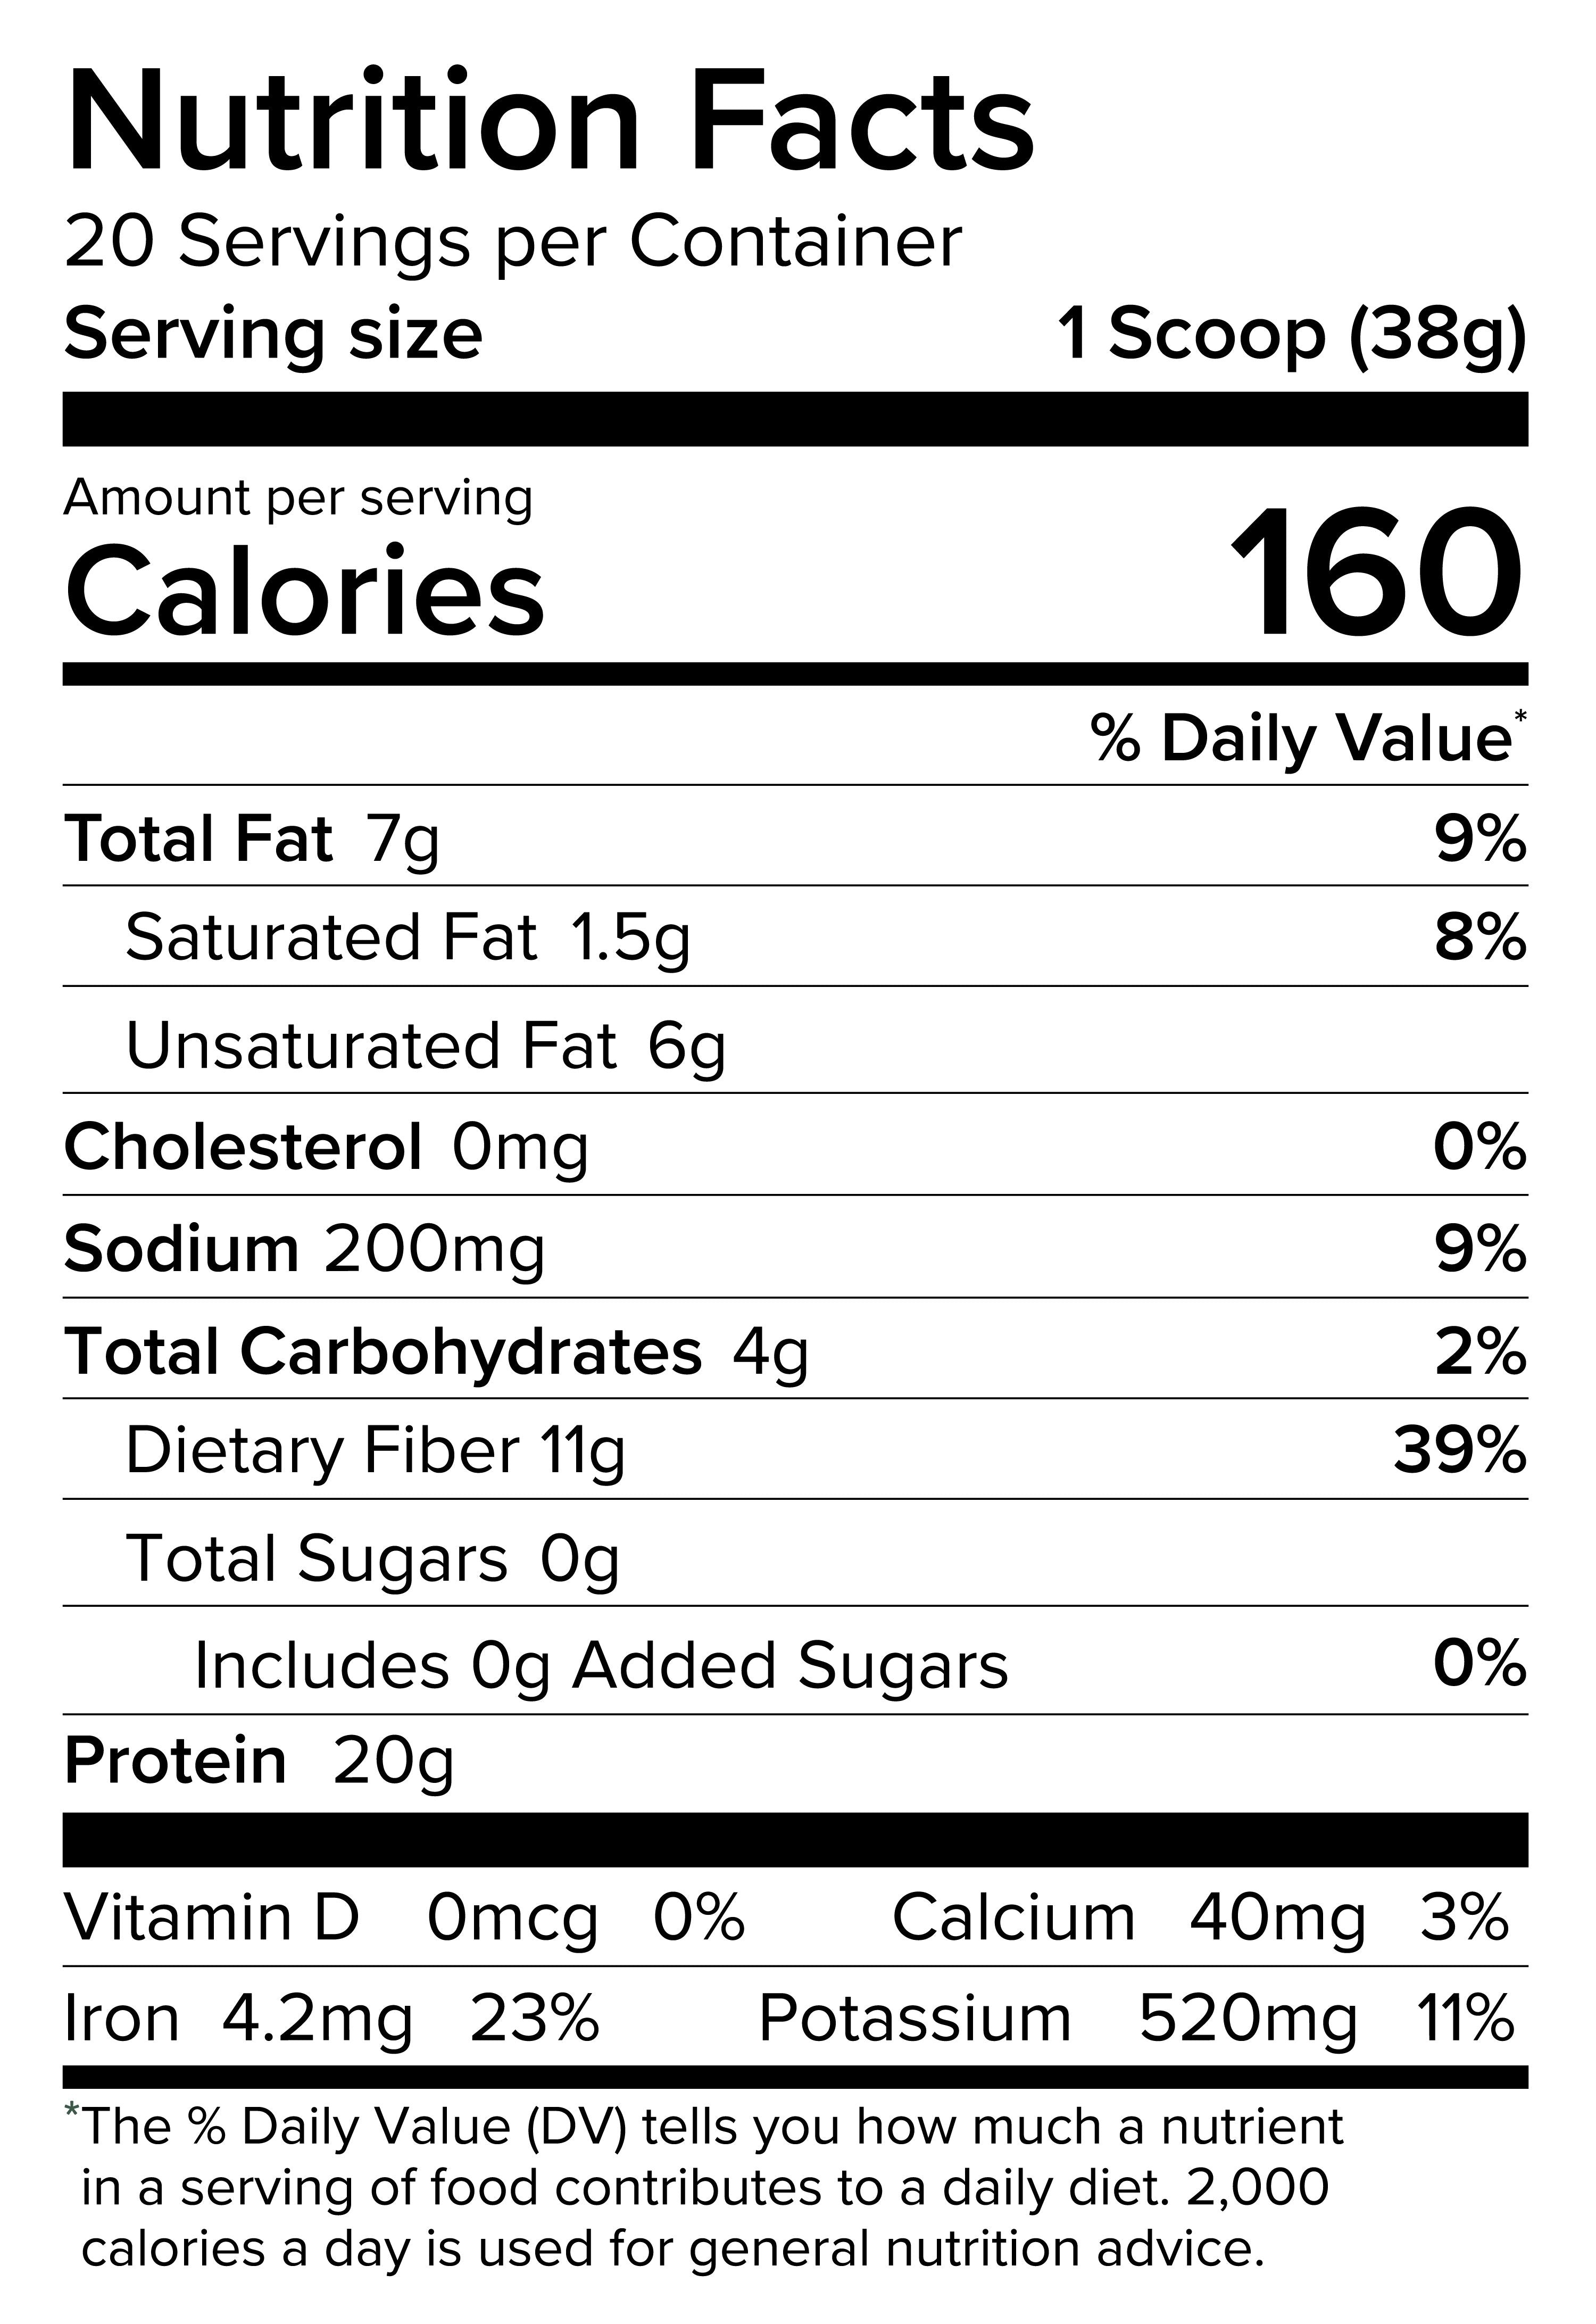 Global Healing's Pure Plant Protein displays its nutritional facts on a concise label.